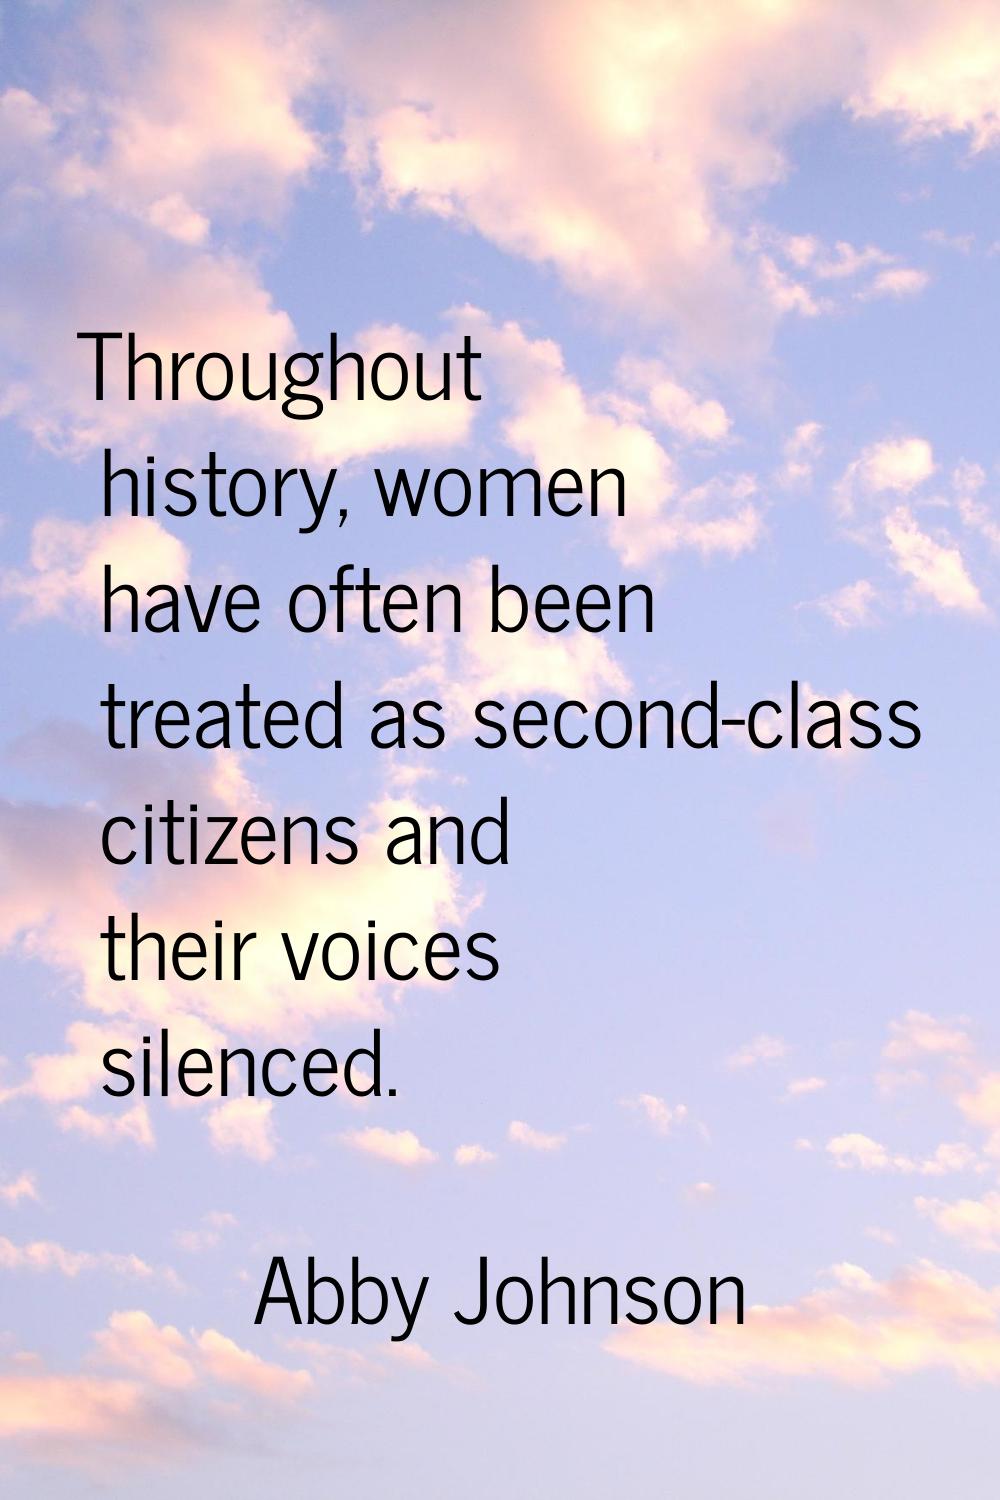 Throughout history, women have often been treated as second-class citizens and their voices silence